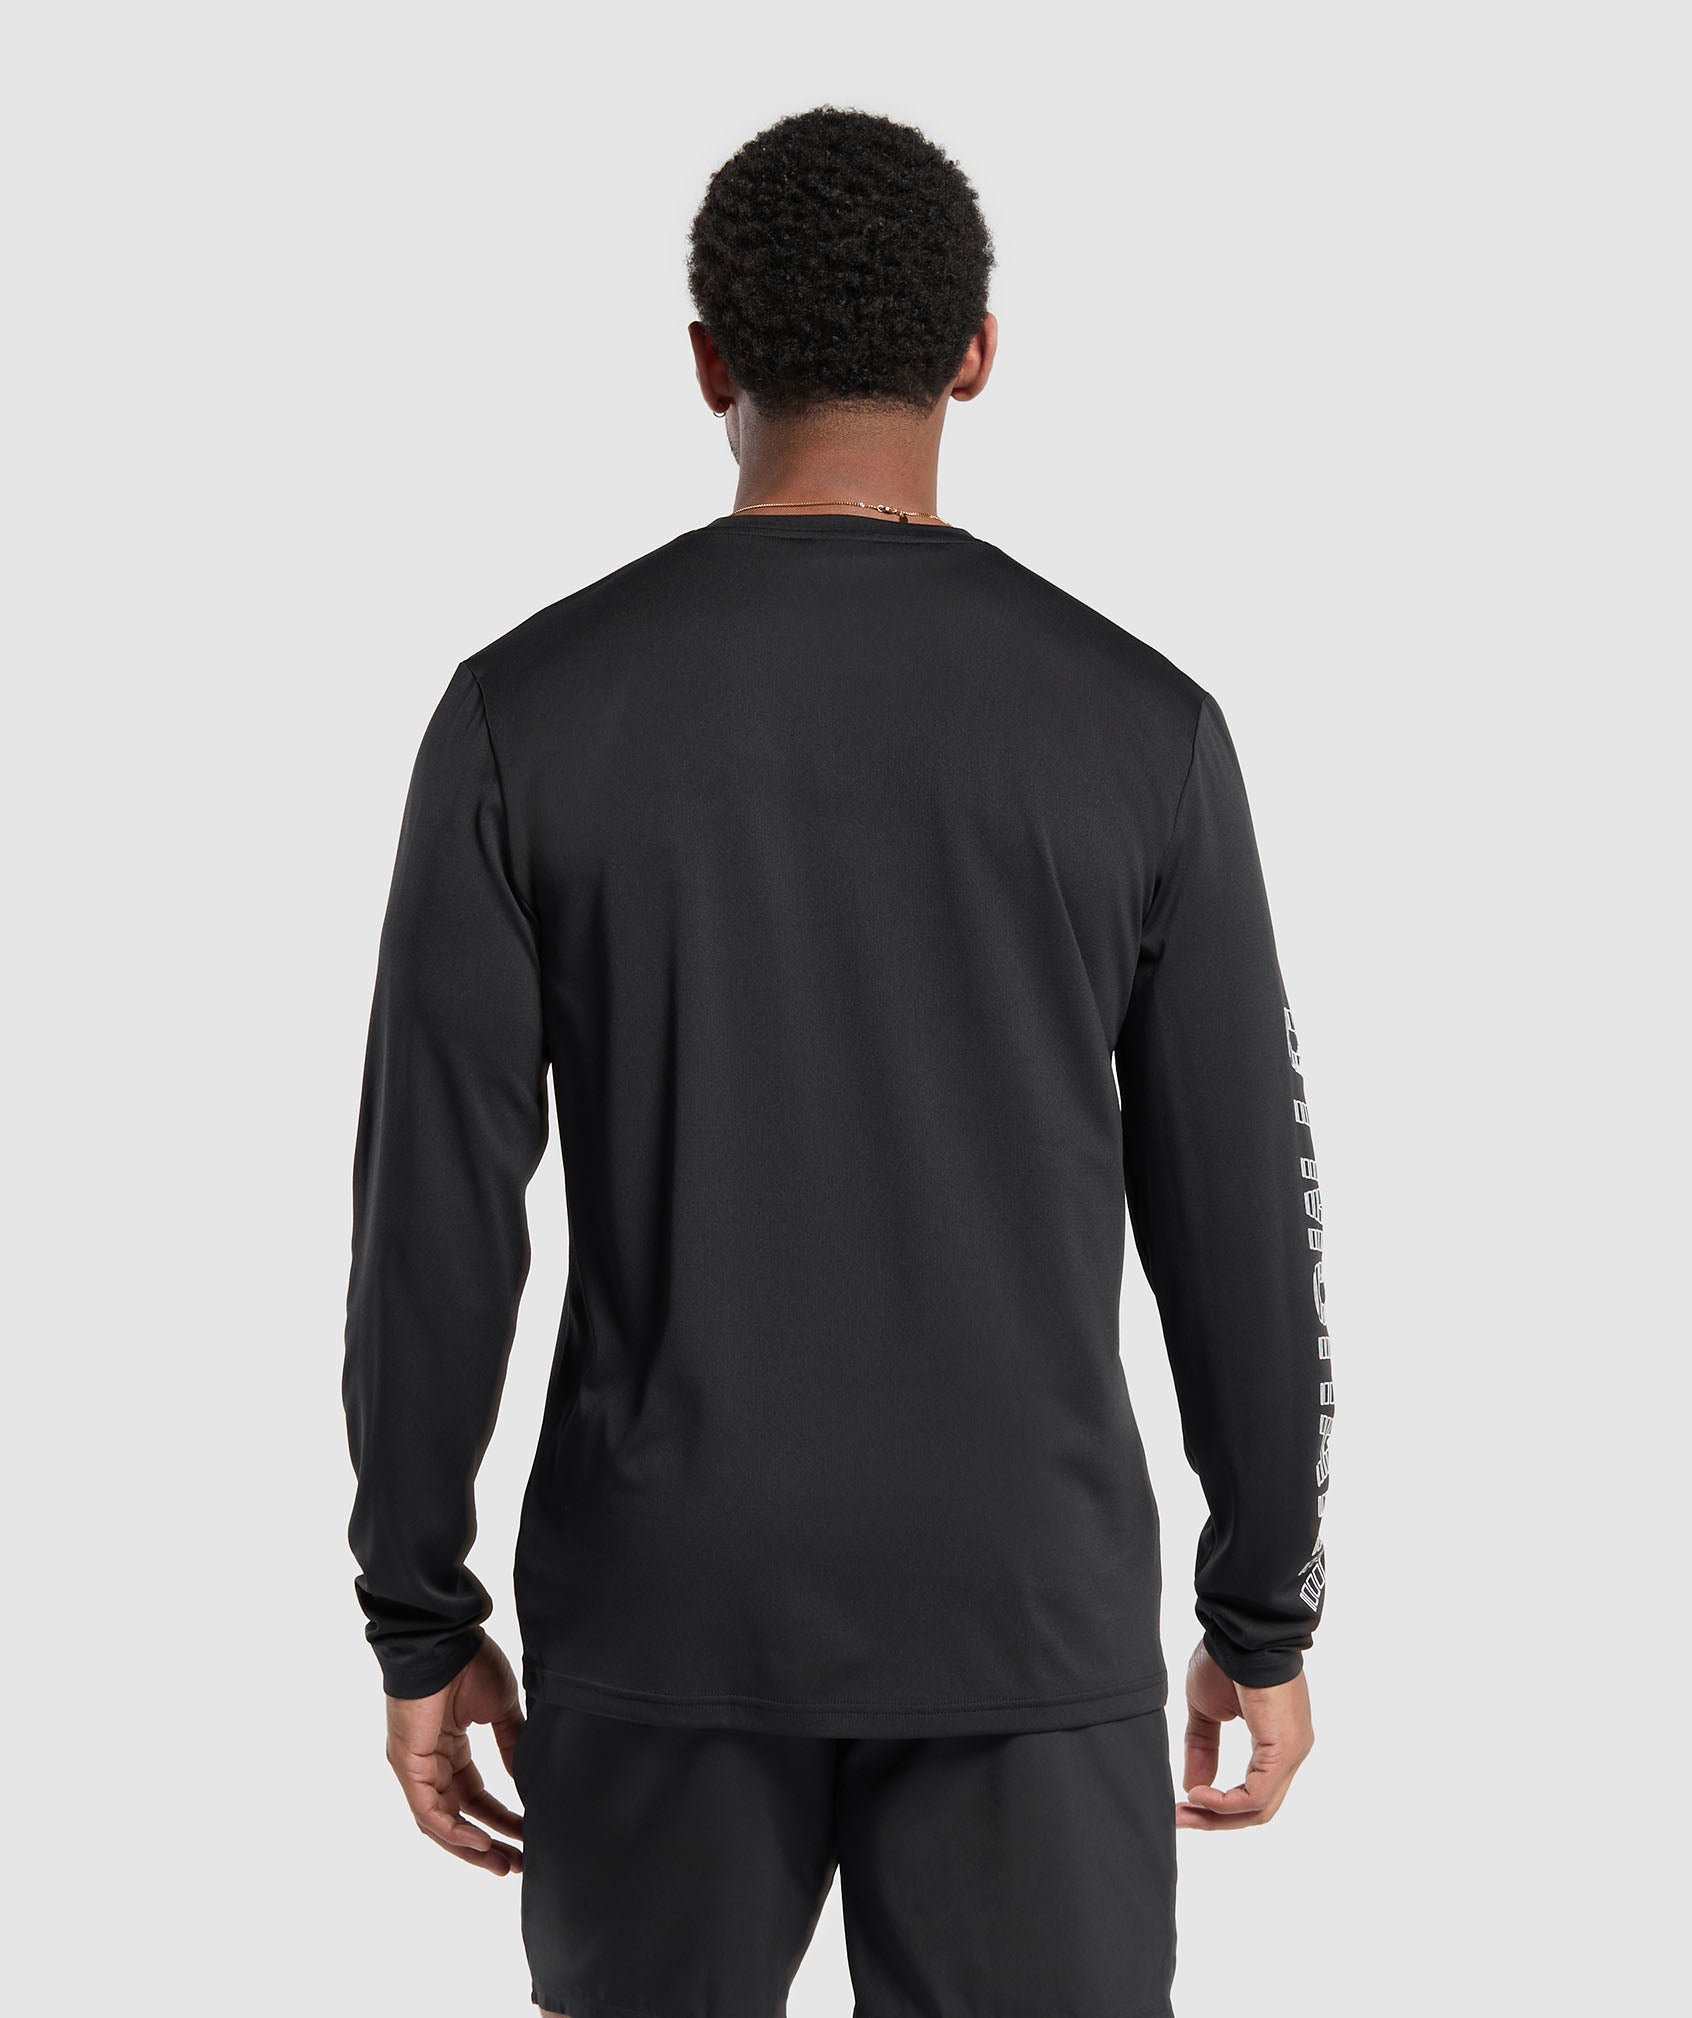 Conditioning Goods Long Sleeve T-Shirt